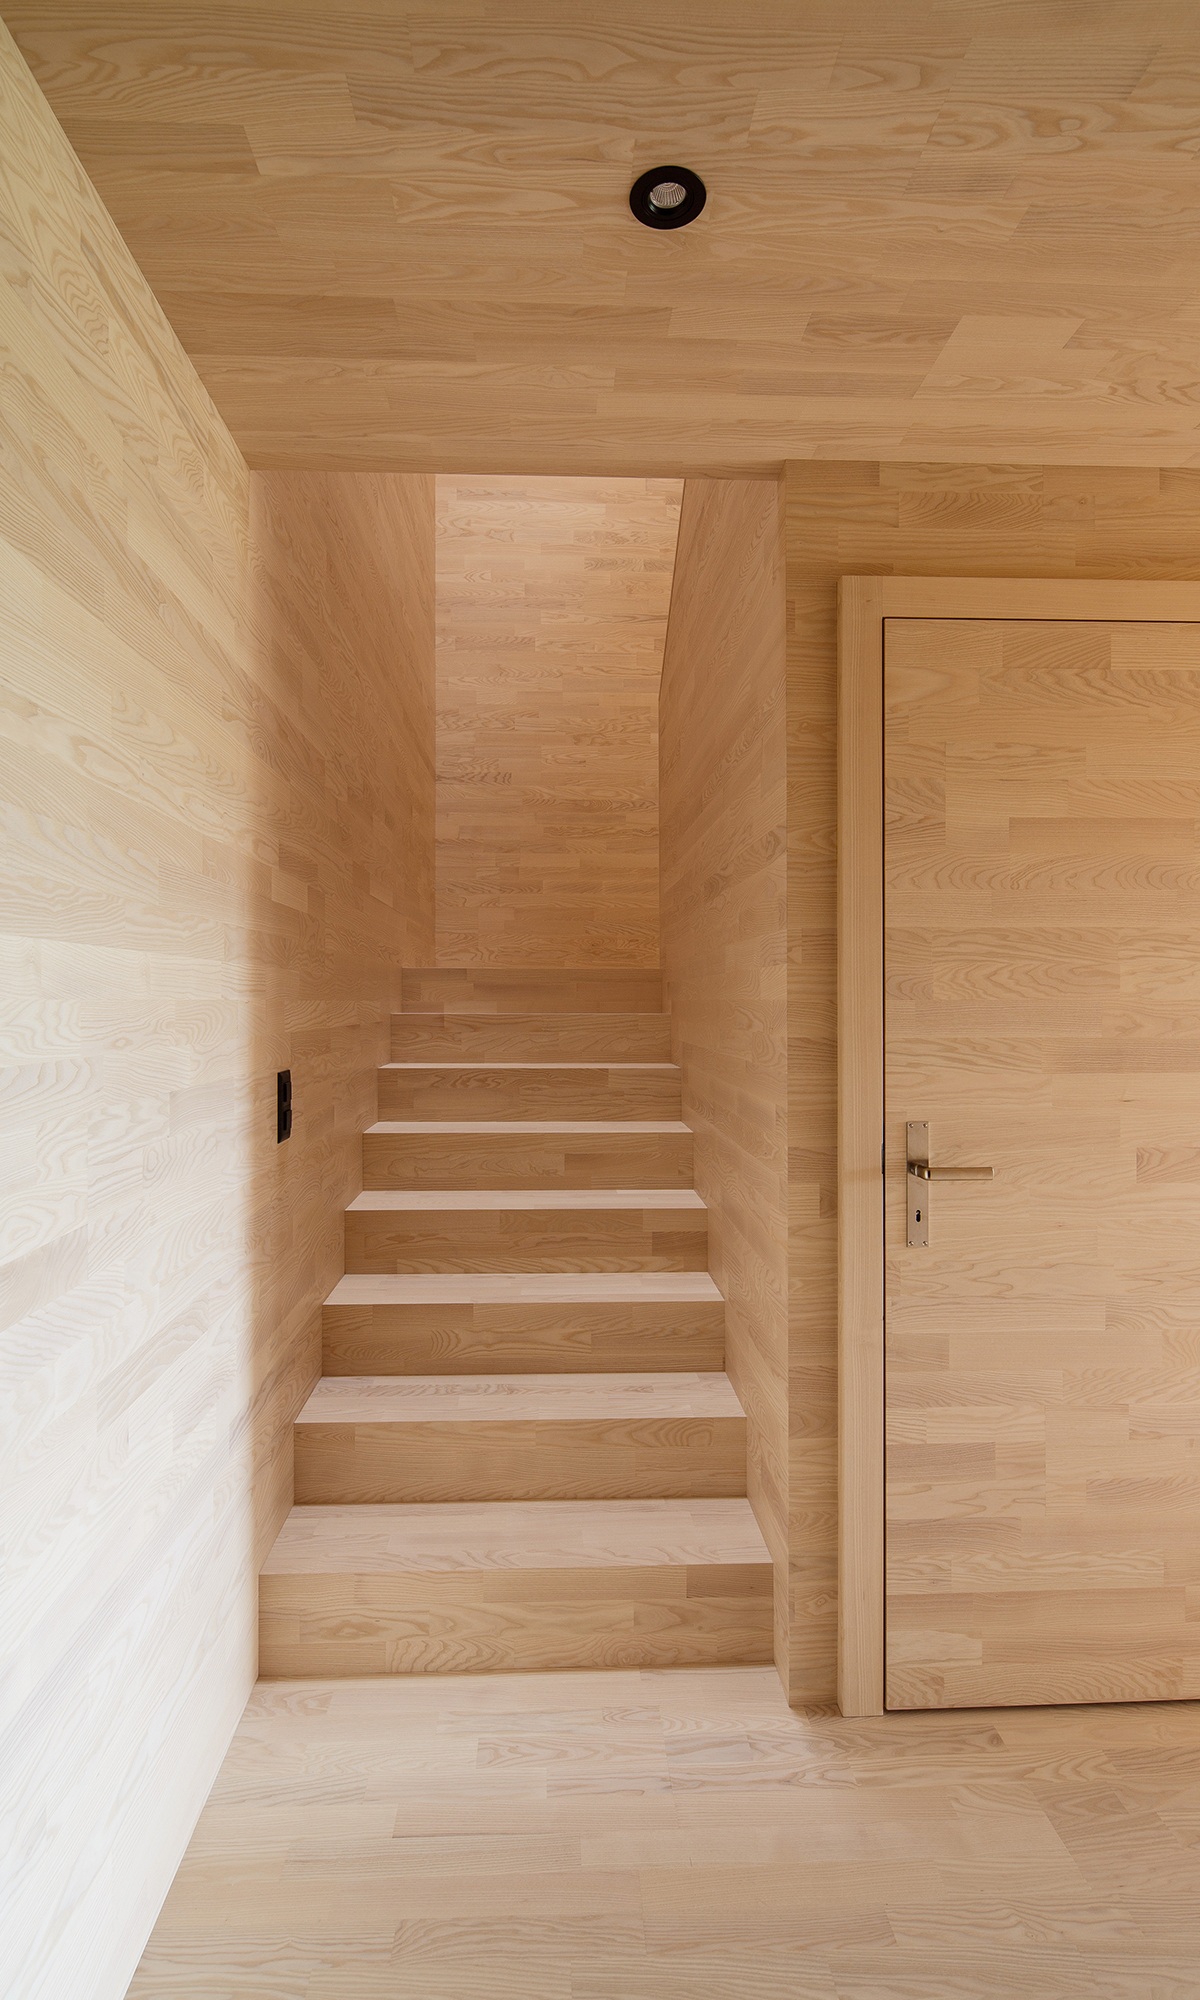 Staircase clad entirely in wood in the Vögelinsegg multi-storey timber construction